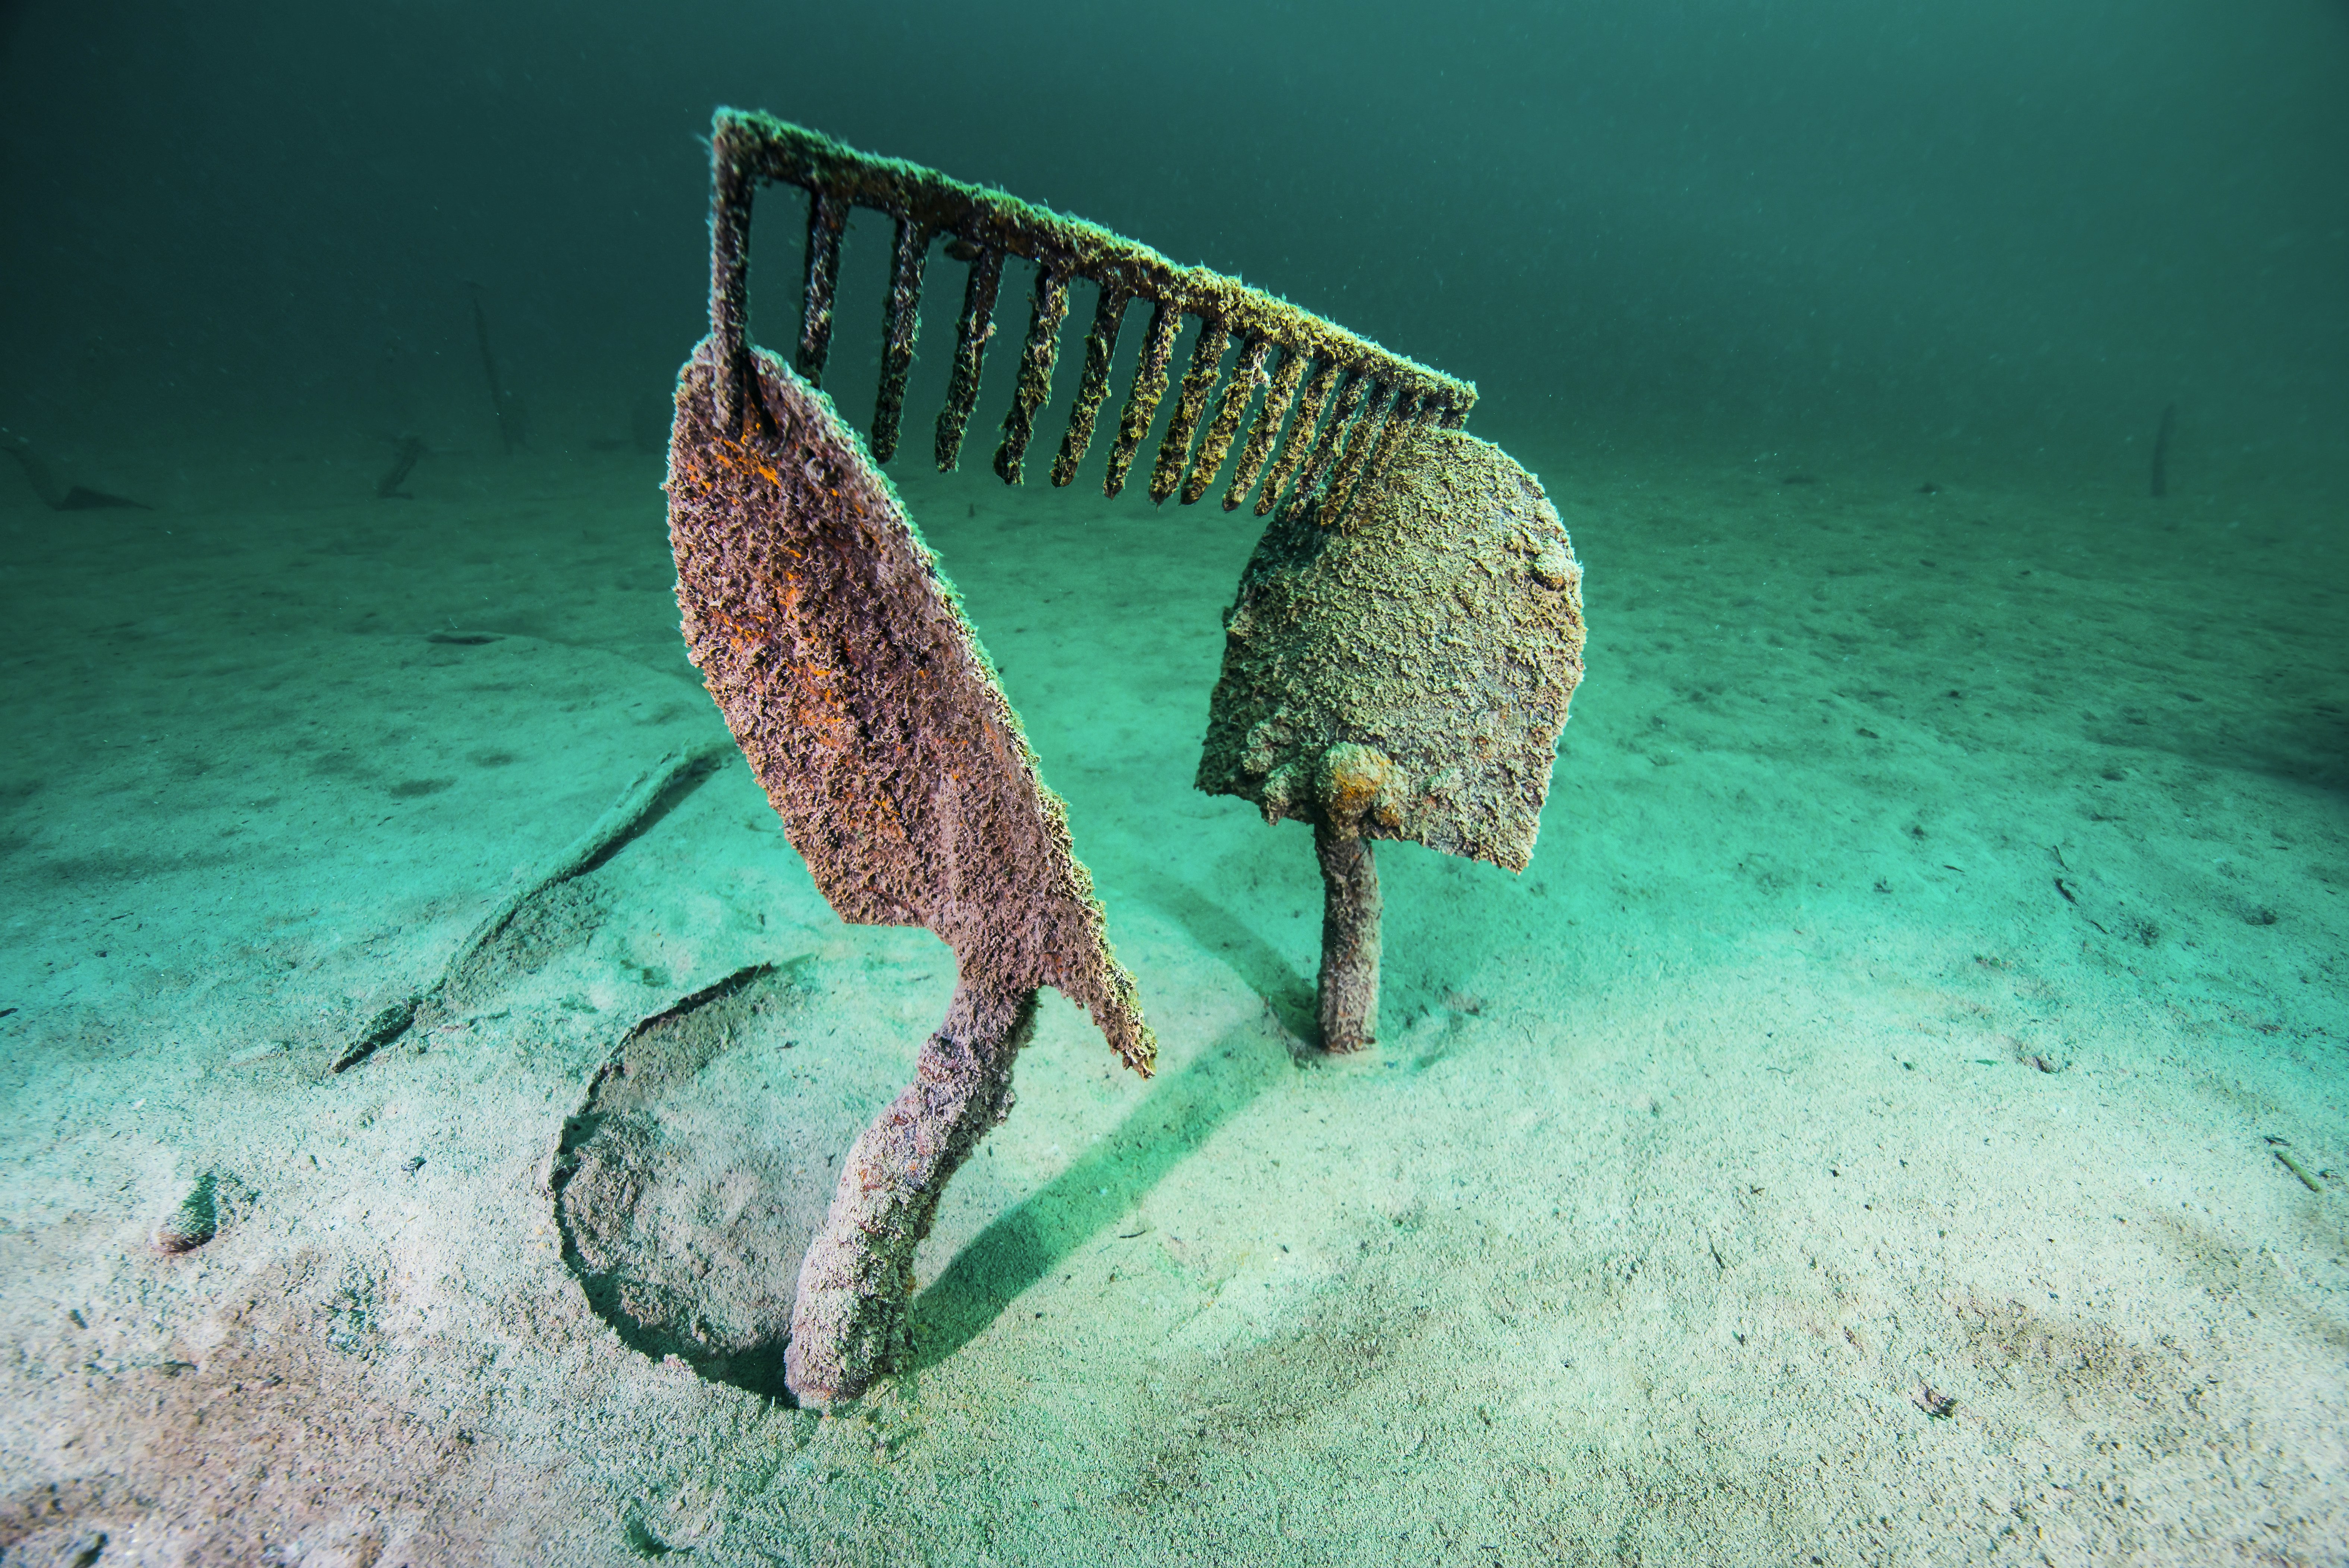 Two shovels, rusted and covered in marine sediment, stand straight up from the bed of Lake McDonald, with an equally rusted rake head perched on top. All around are the deep teal and bright aqua waters found throughout Glacier National Park